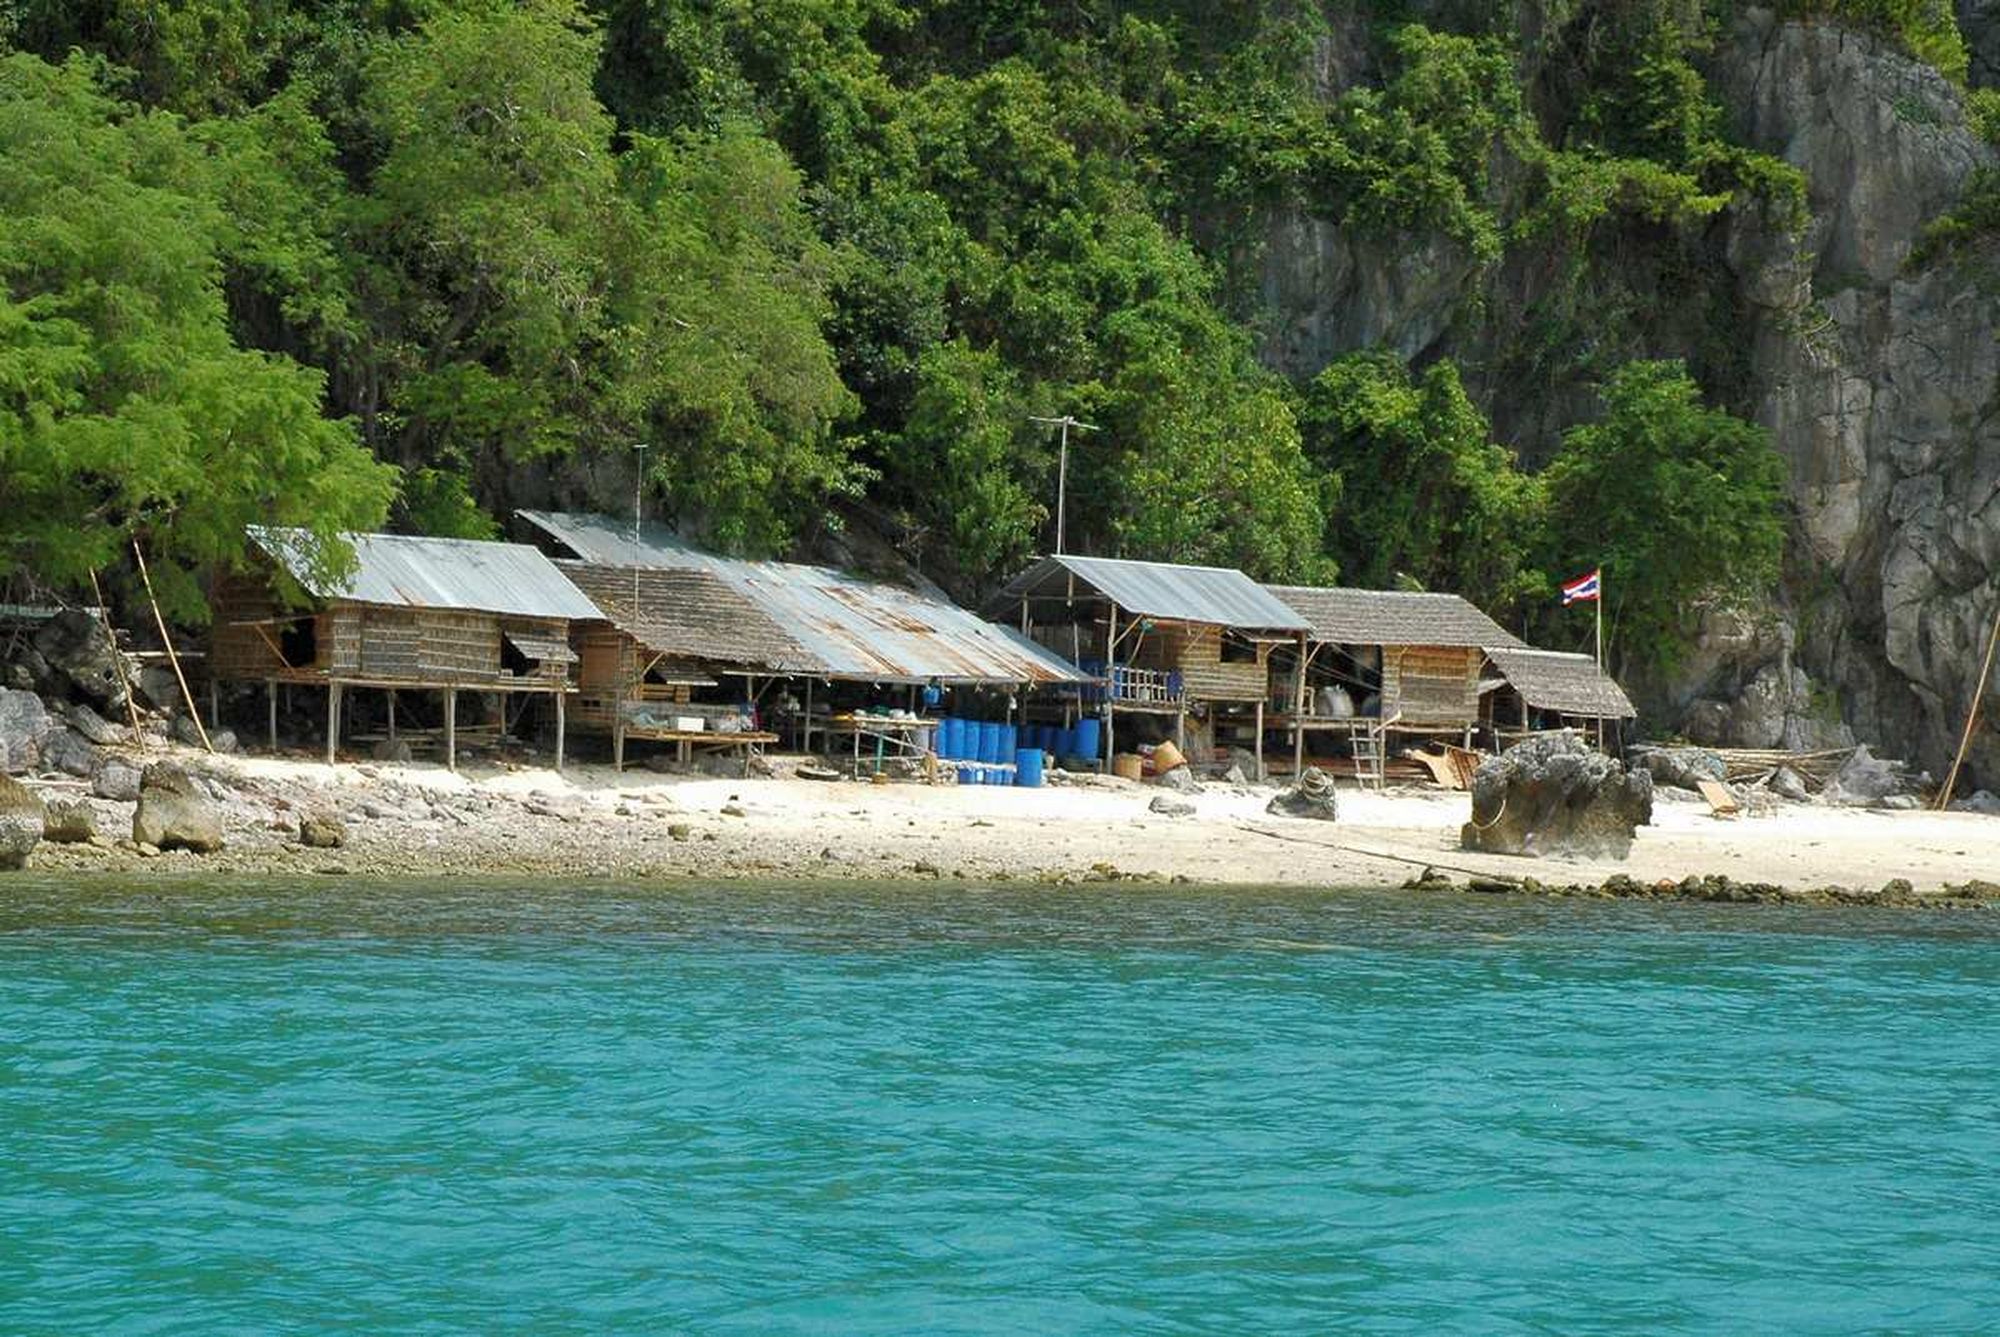 One of the Five Islands is home to a sandy beach with bungalows.